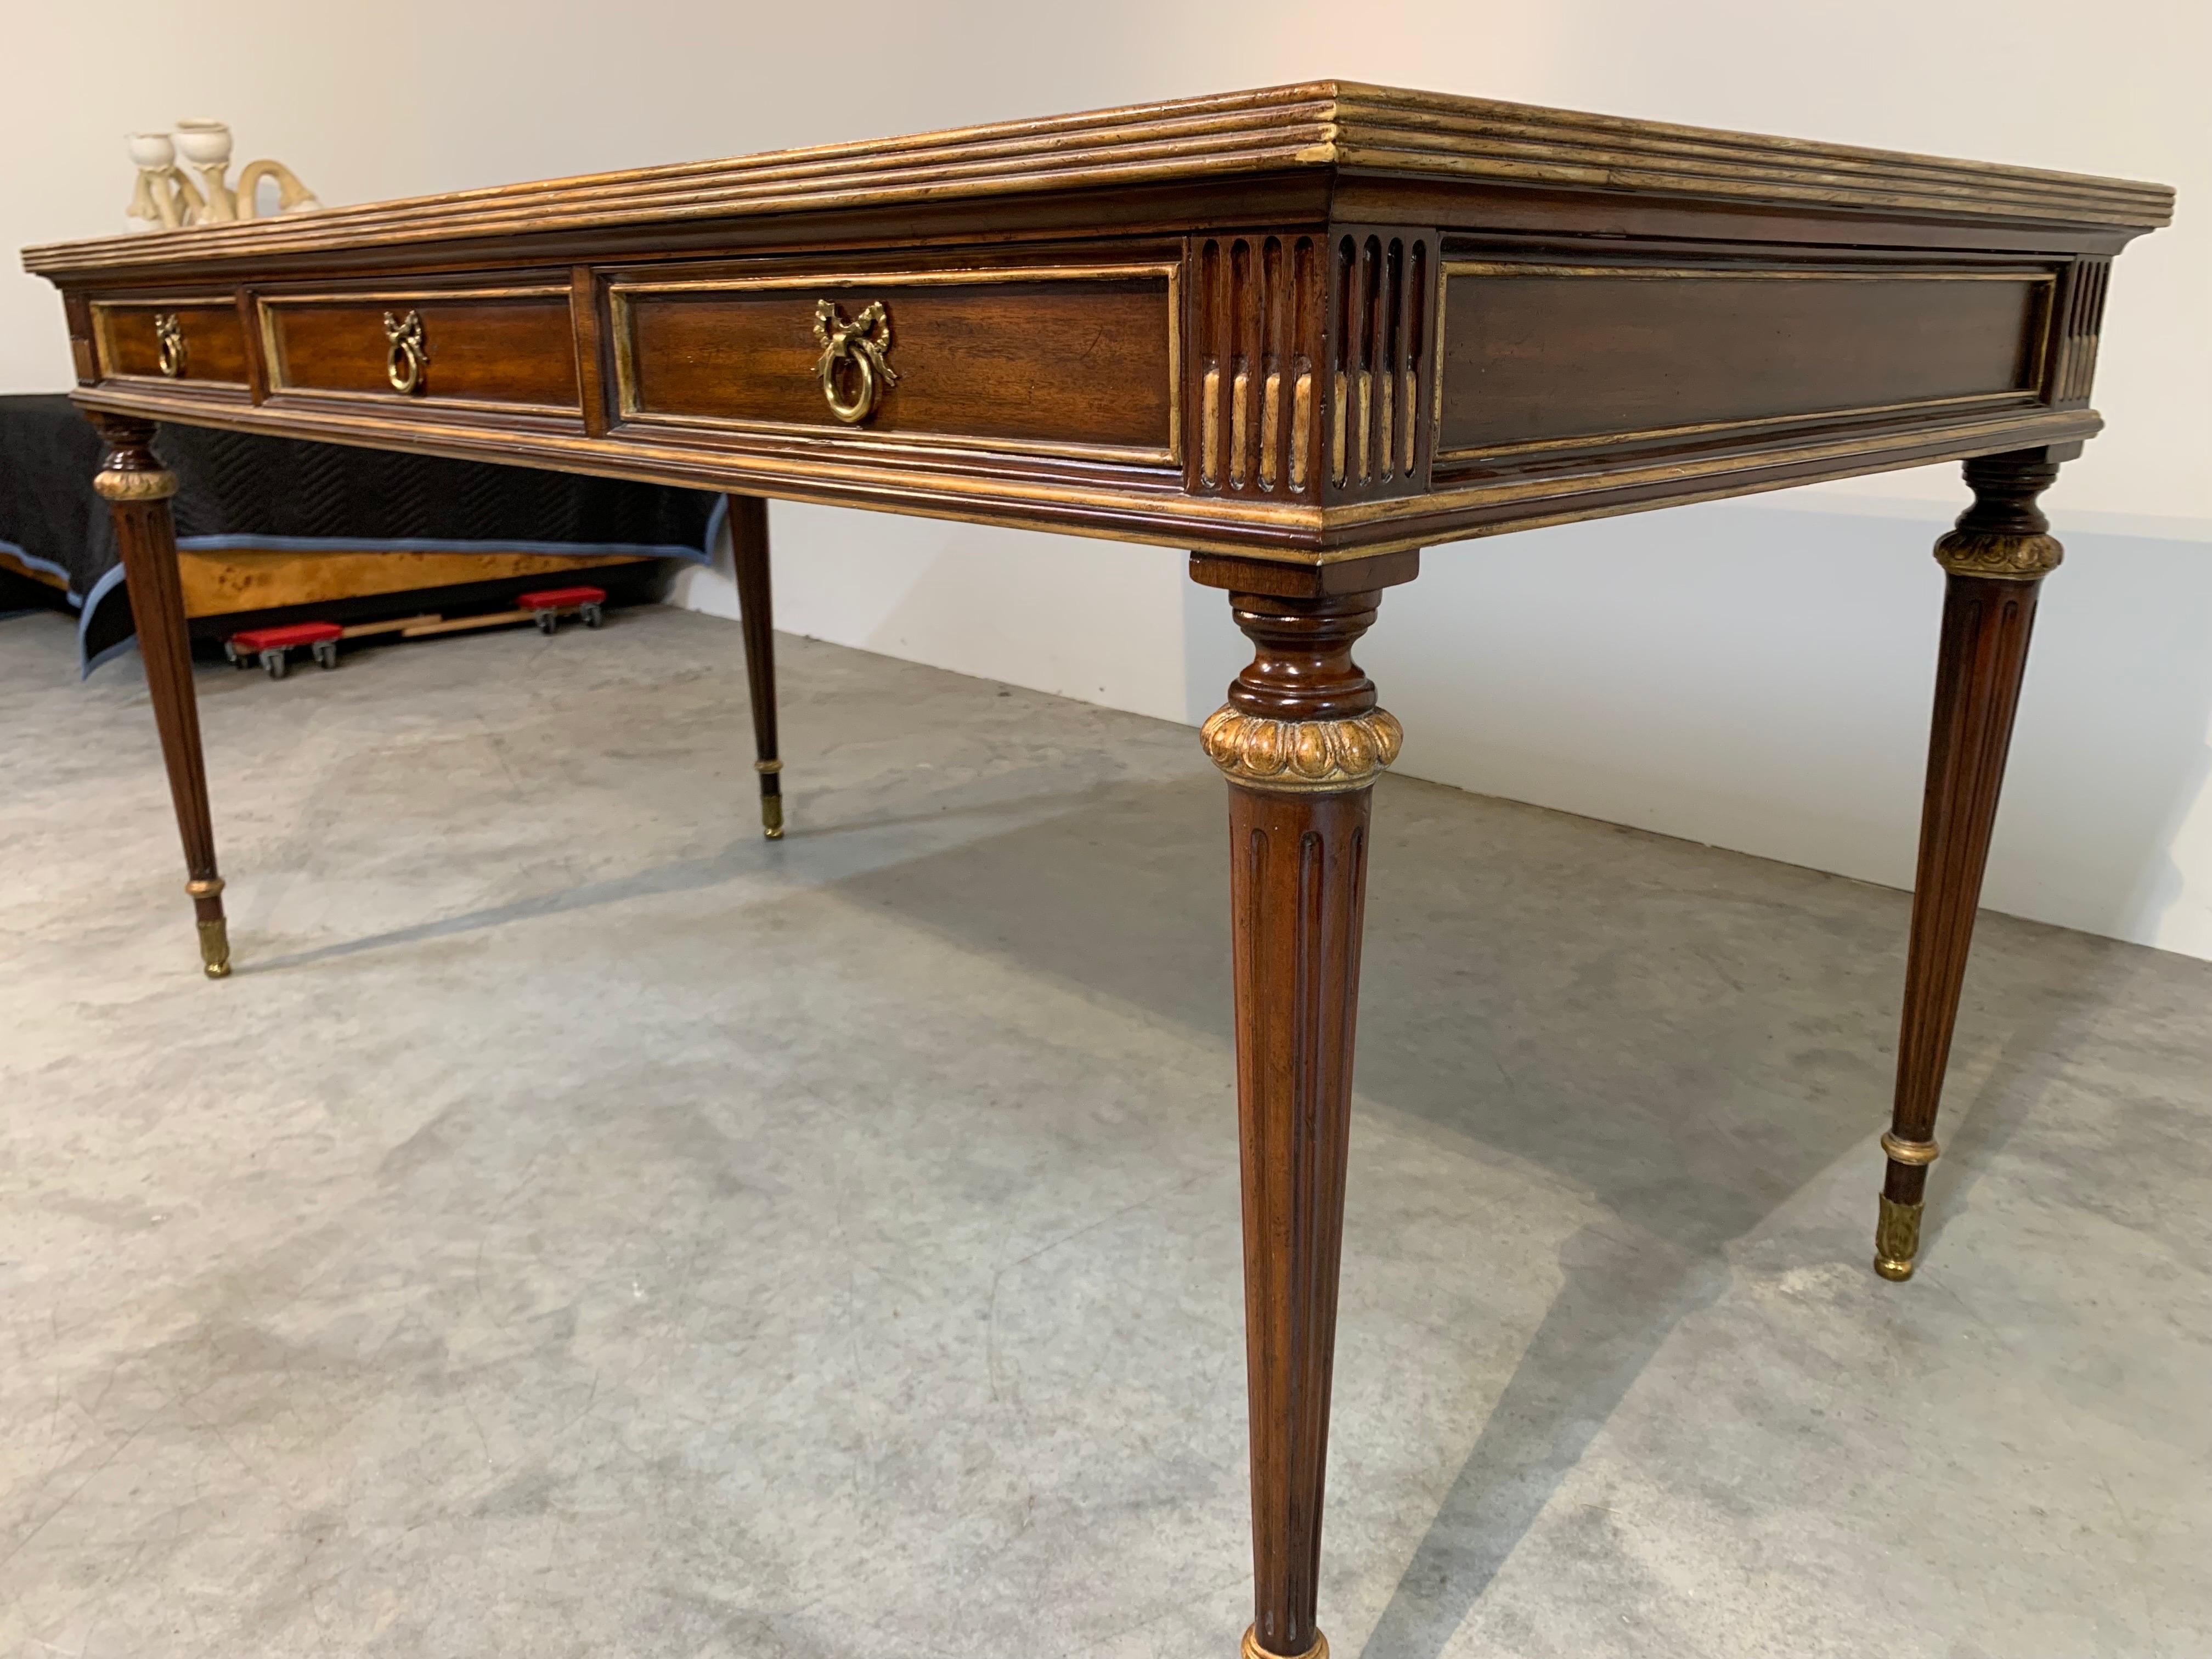 20th Century French Louis XVI Directoire Style Desk by Maitland Smith